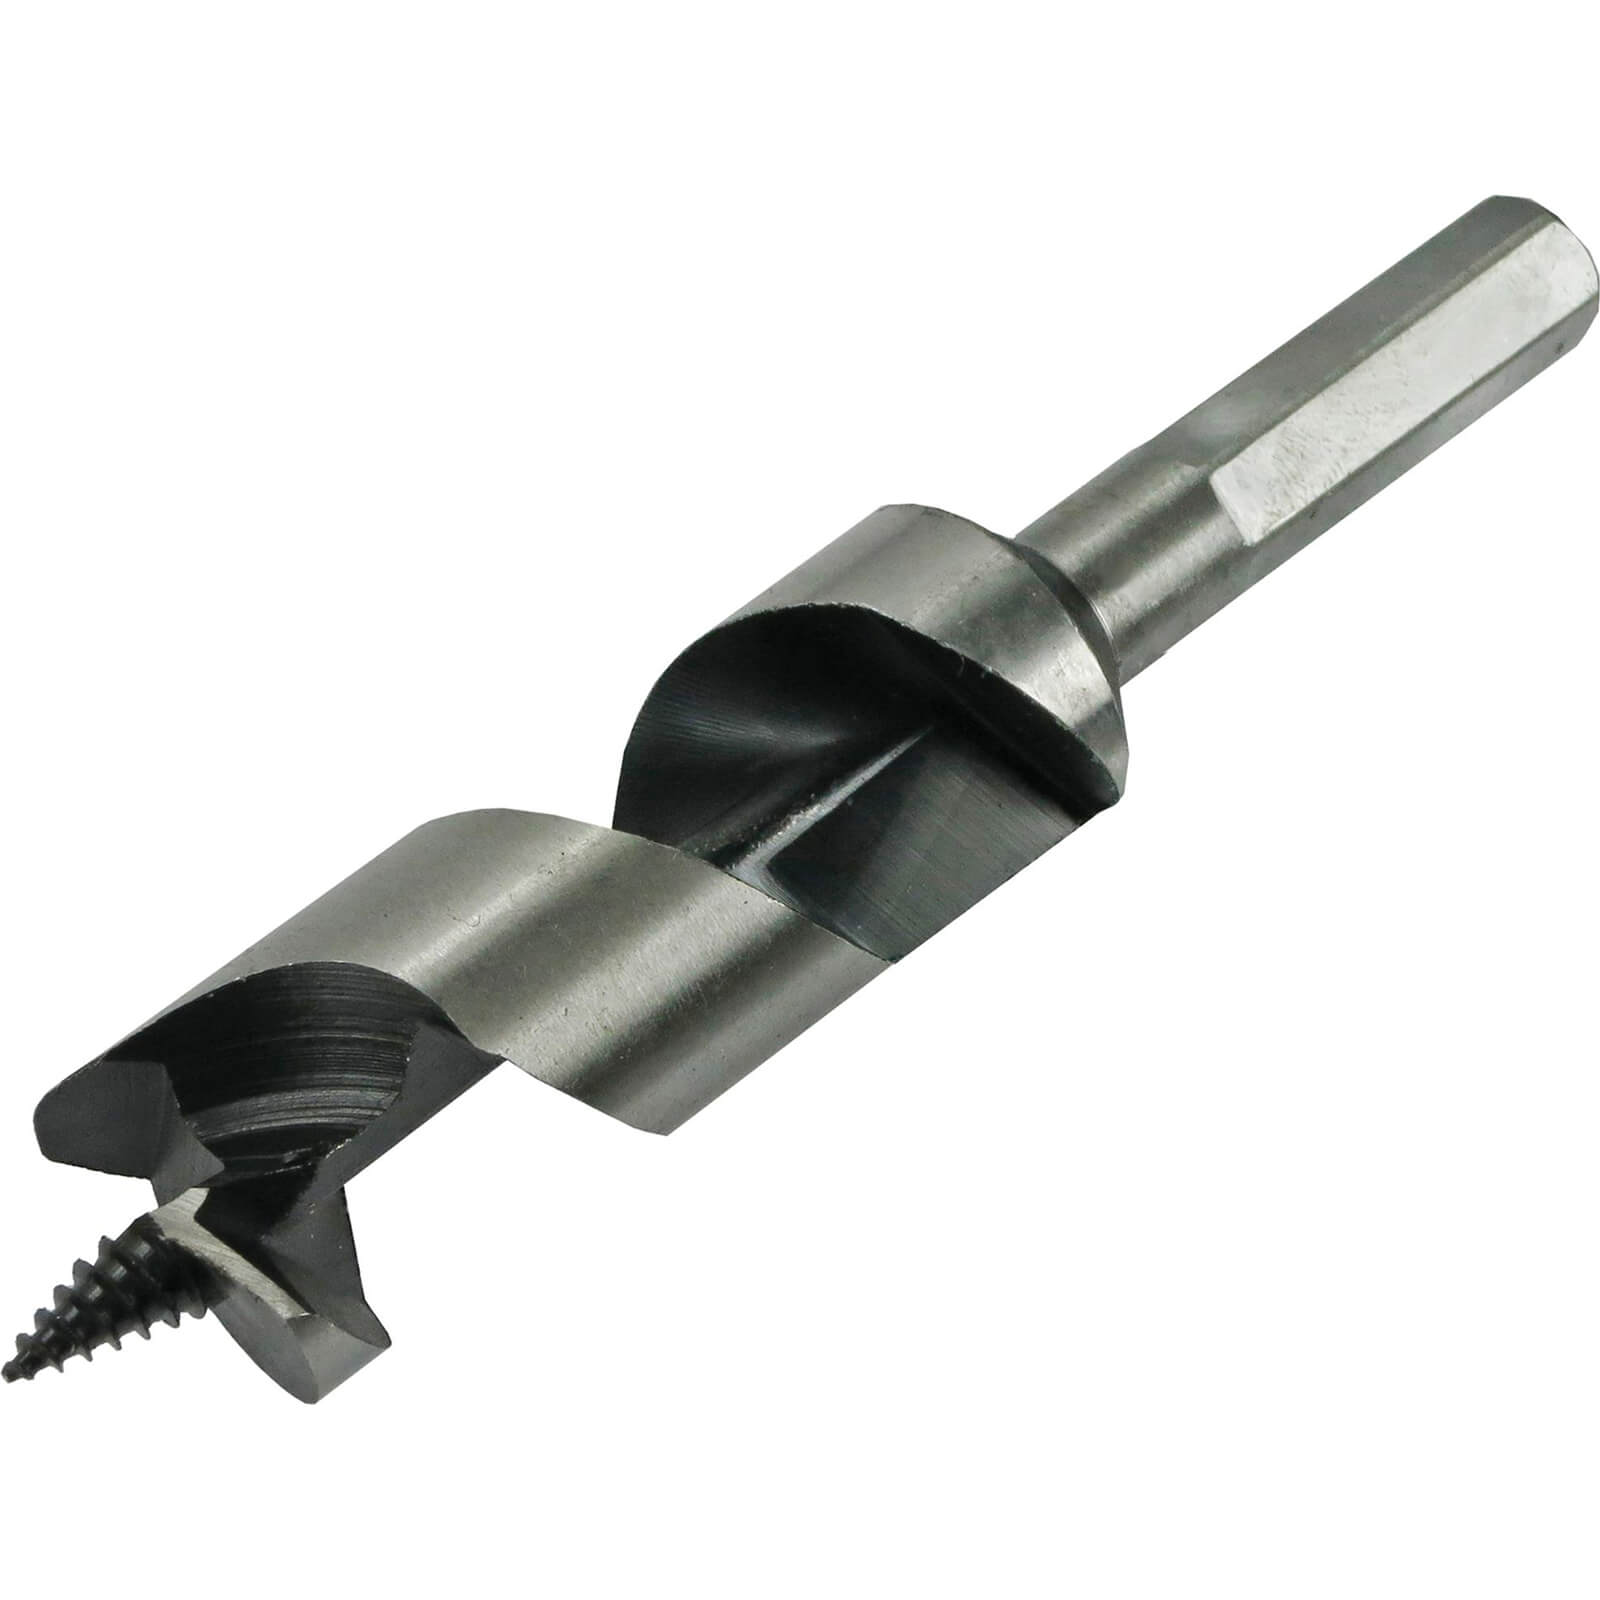 Image of Faithfull Combination Auger Drill Bit 25mm 120mm